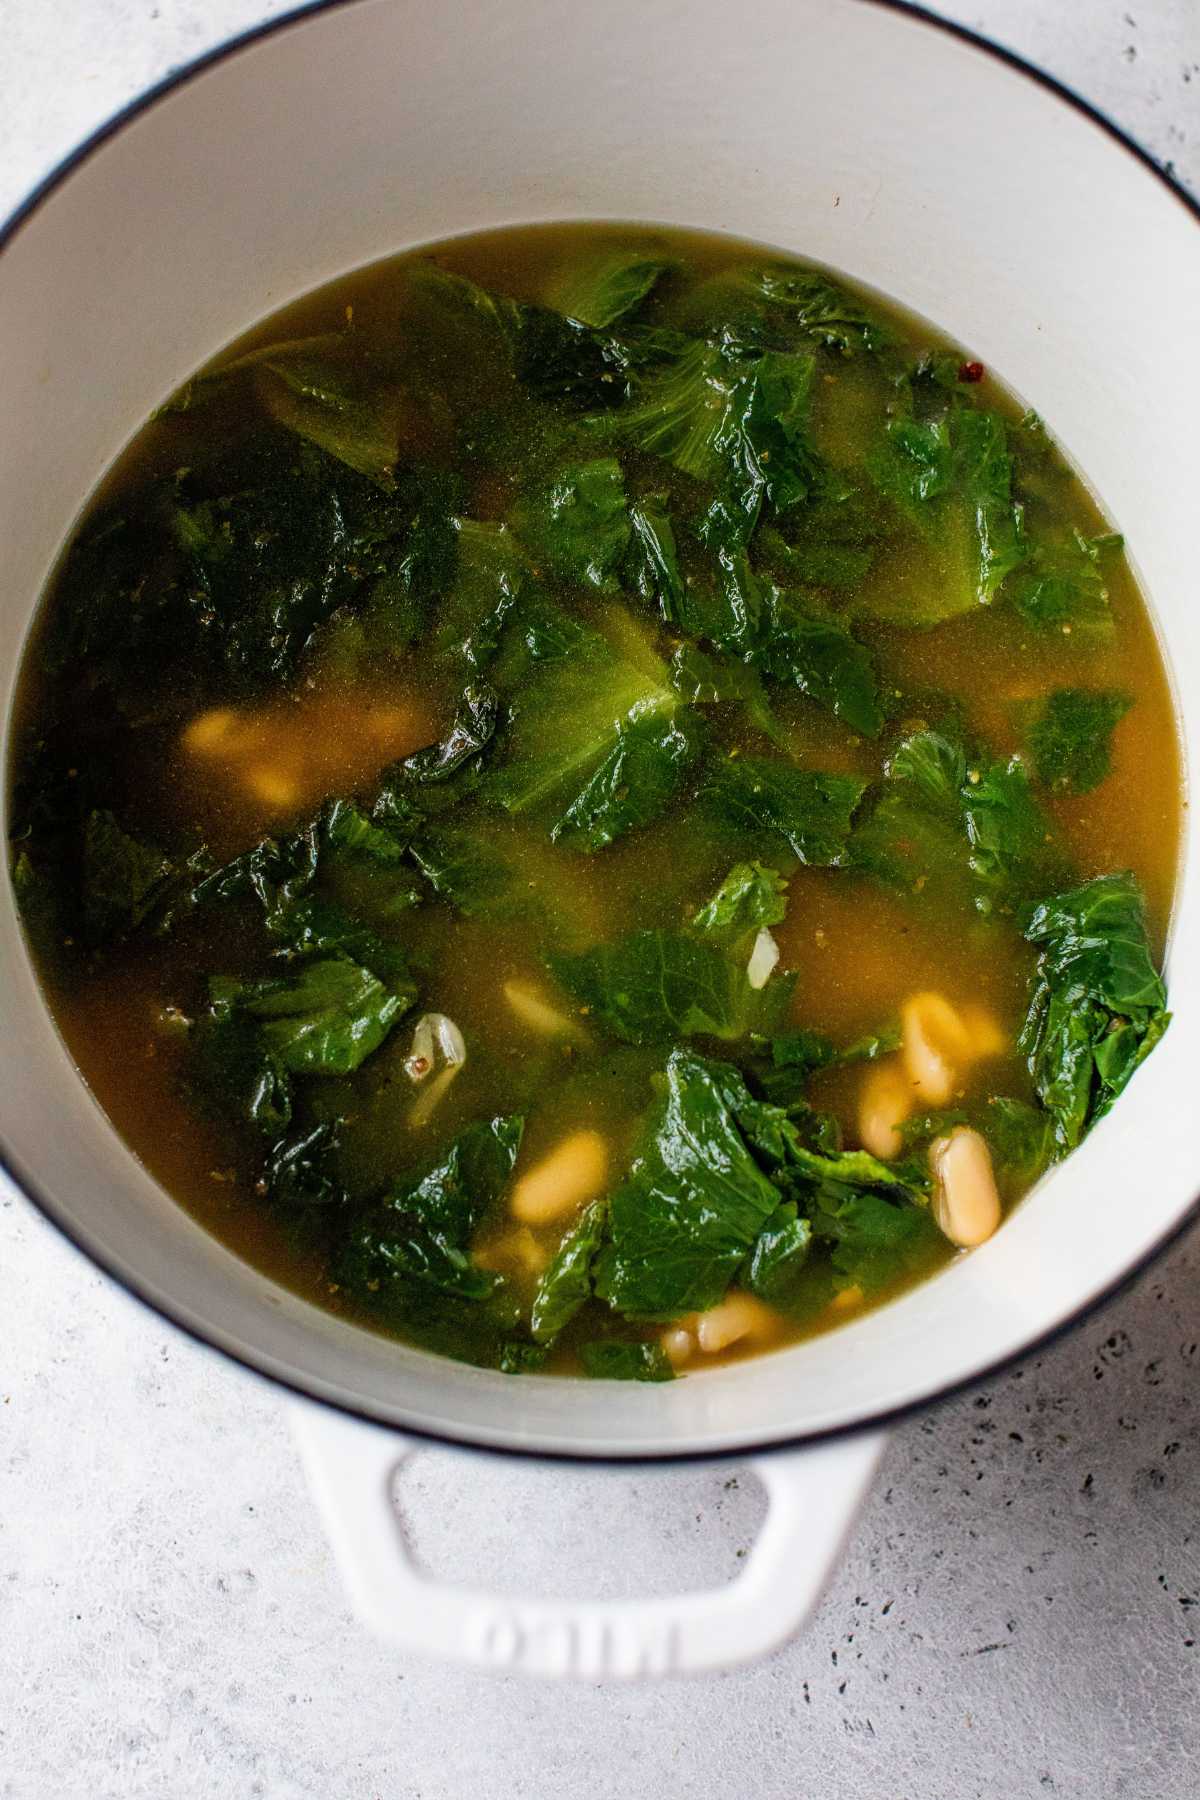 Escarole cooking with white beans in chicken broth.